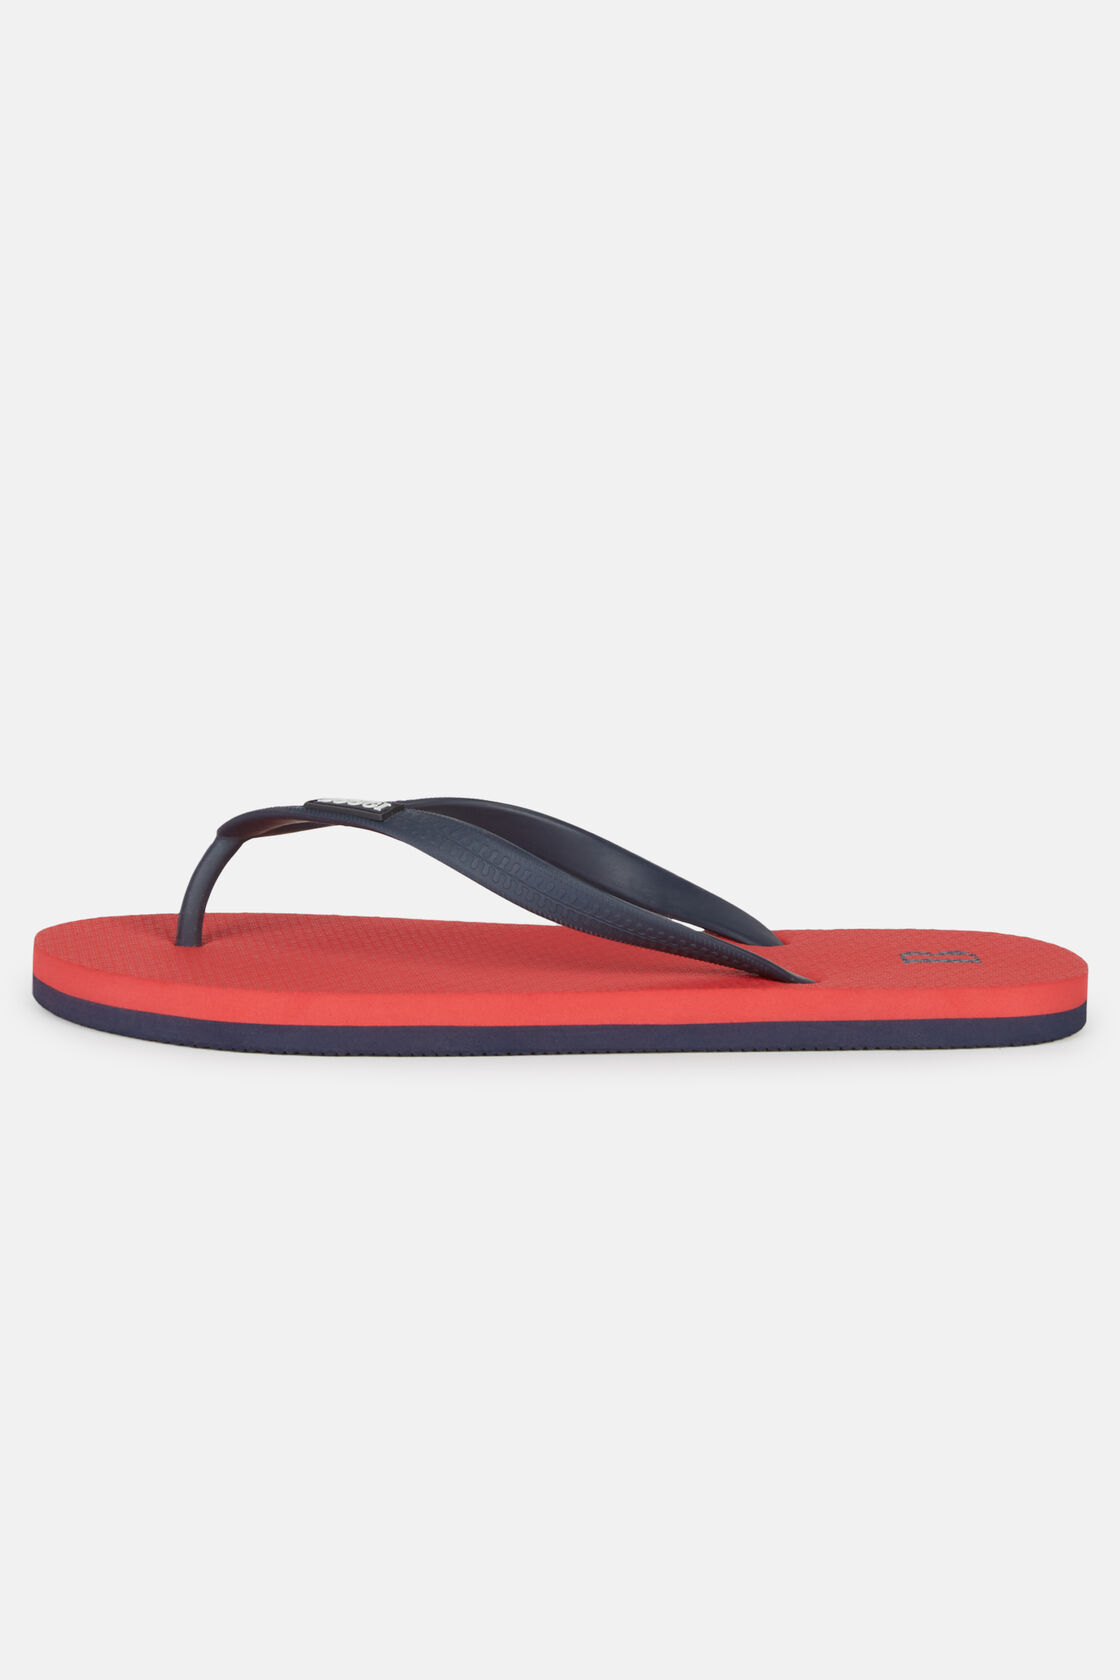 Rode rubberen slippers, Red, hi-res